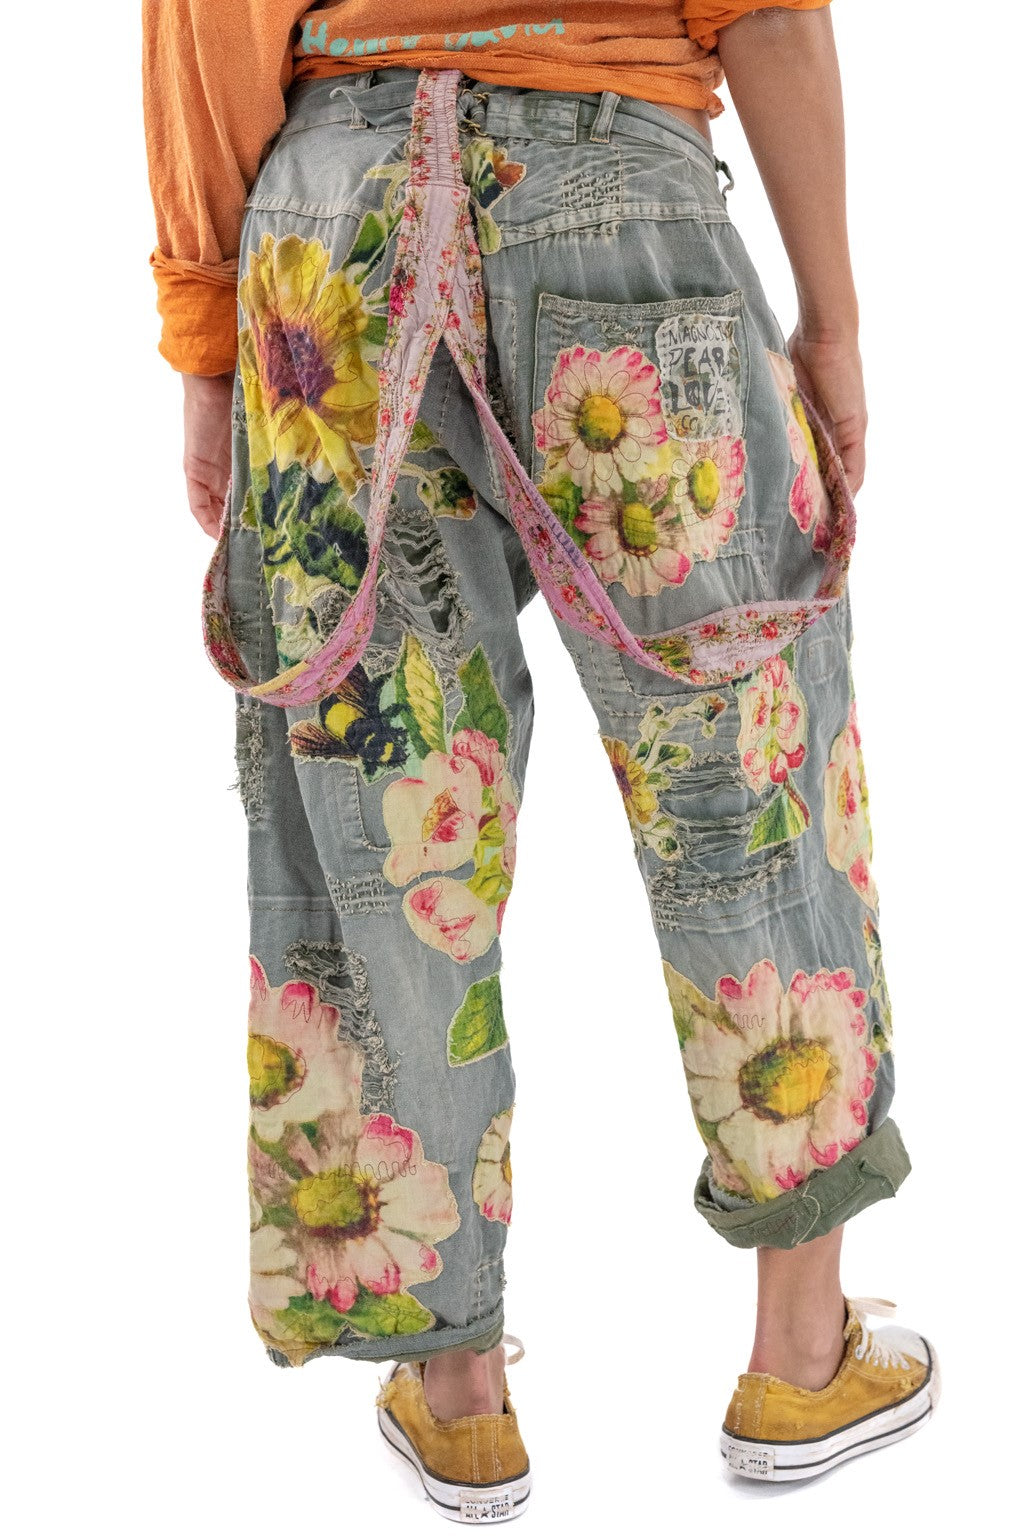 Pant 433 Miners Pants with Sunflower  Ashbury Peace